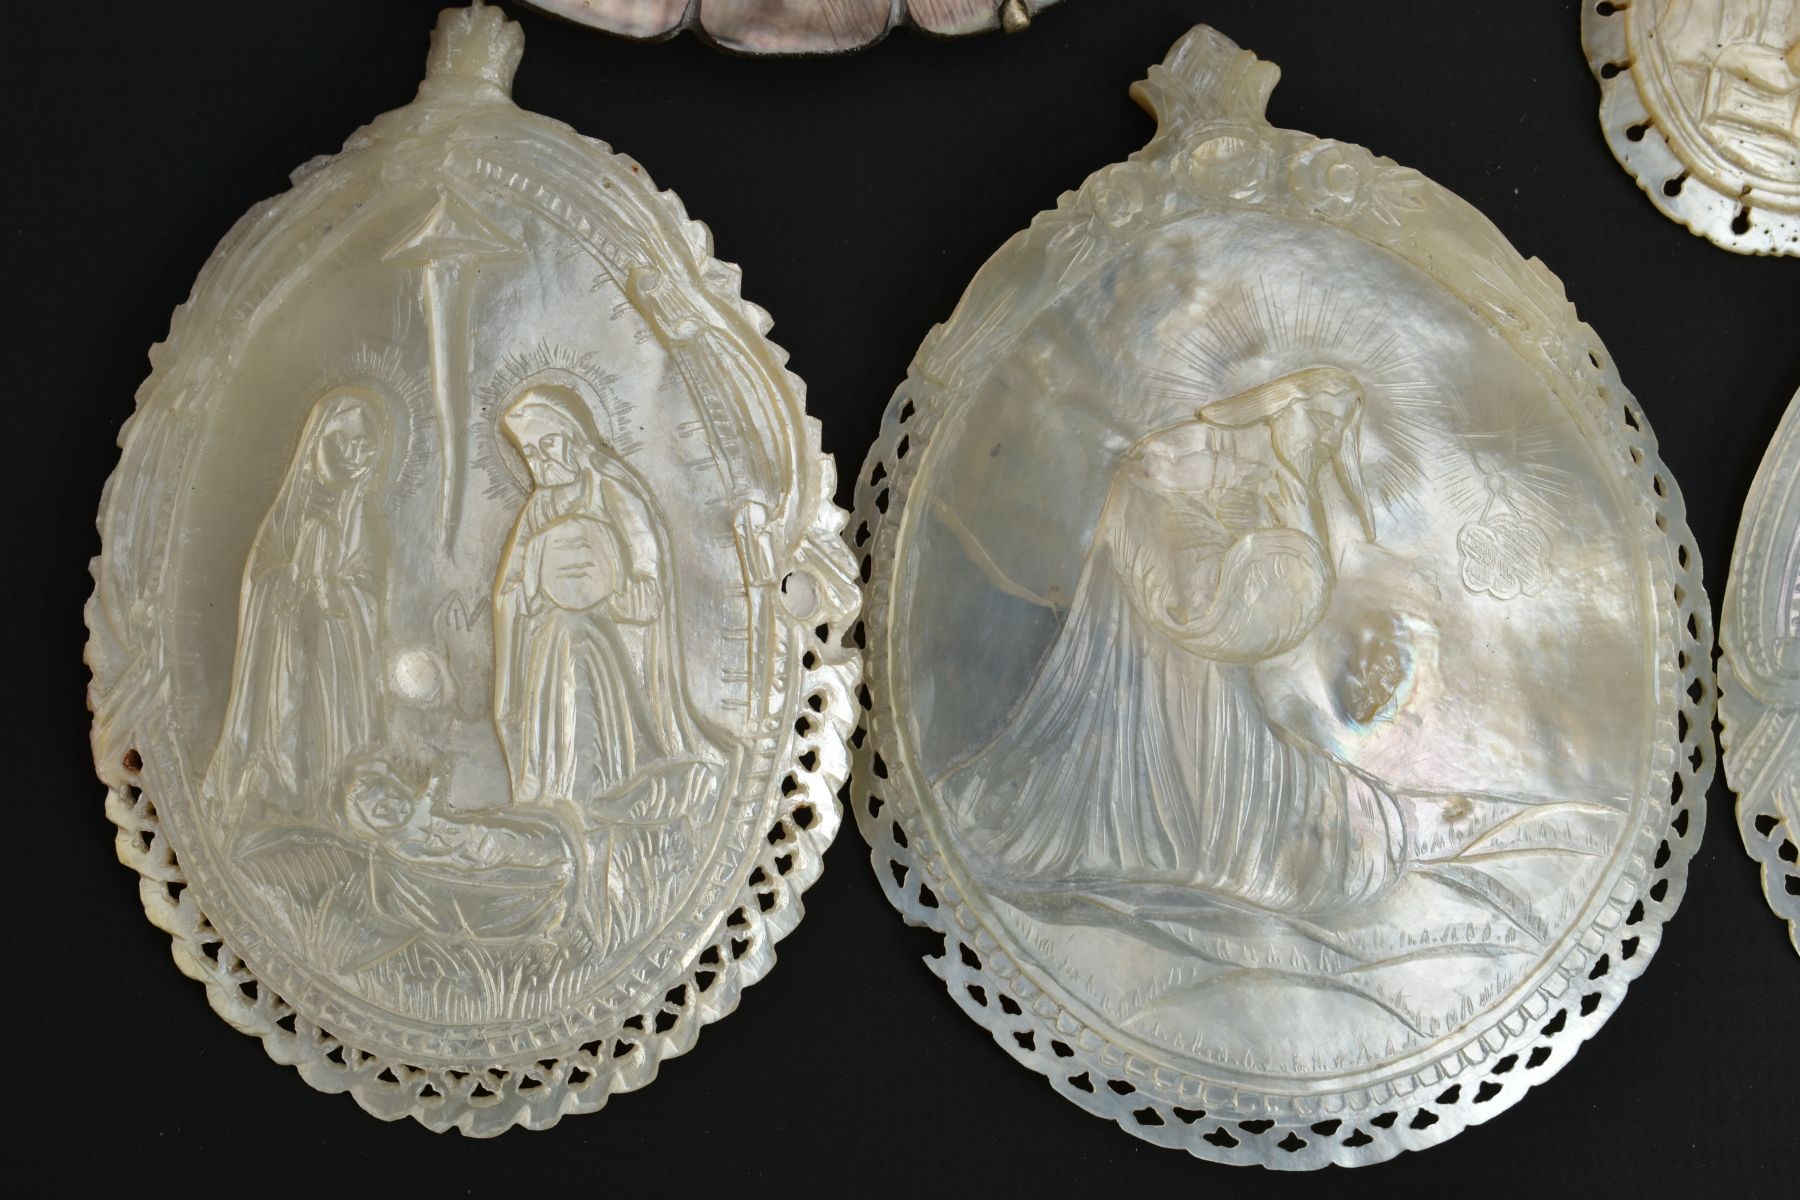 SEVEN MOTHER OF PEARL SHELL CARVINGS OF BIBLICAL SCENES, including the Nativity, the crucifixion and - Image 15 of 17